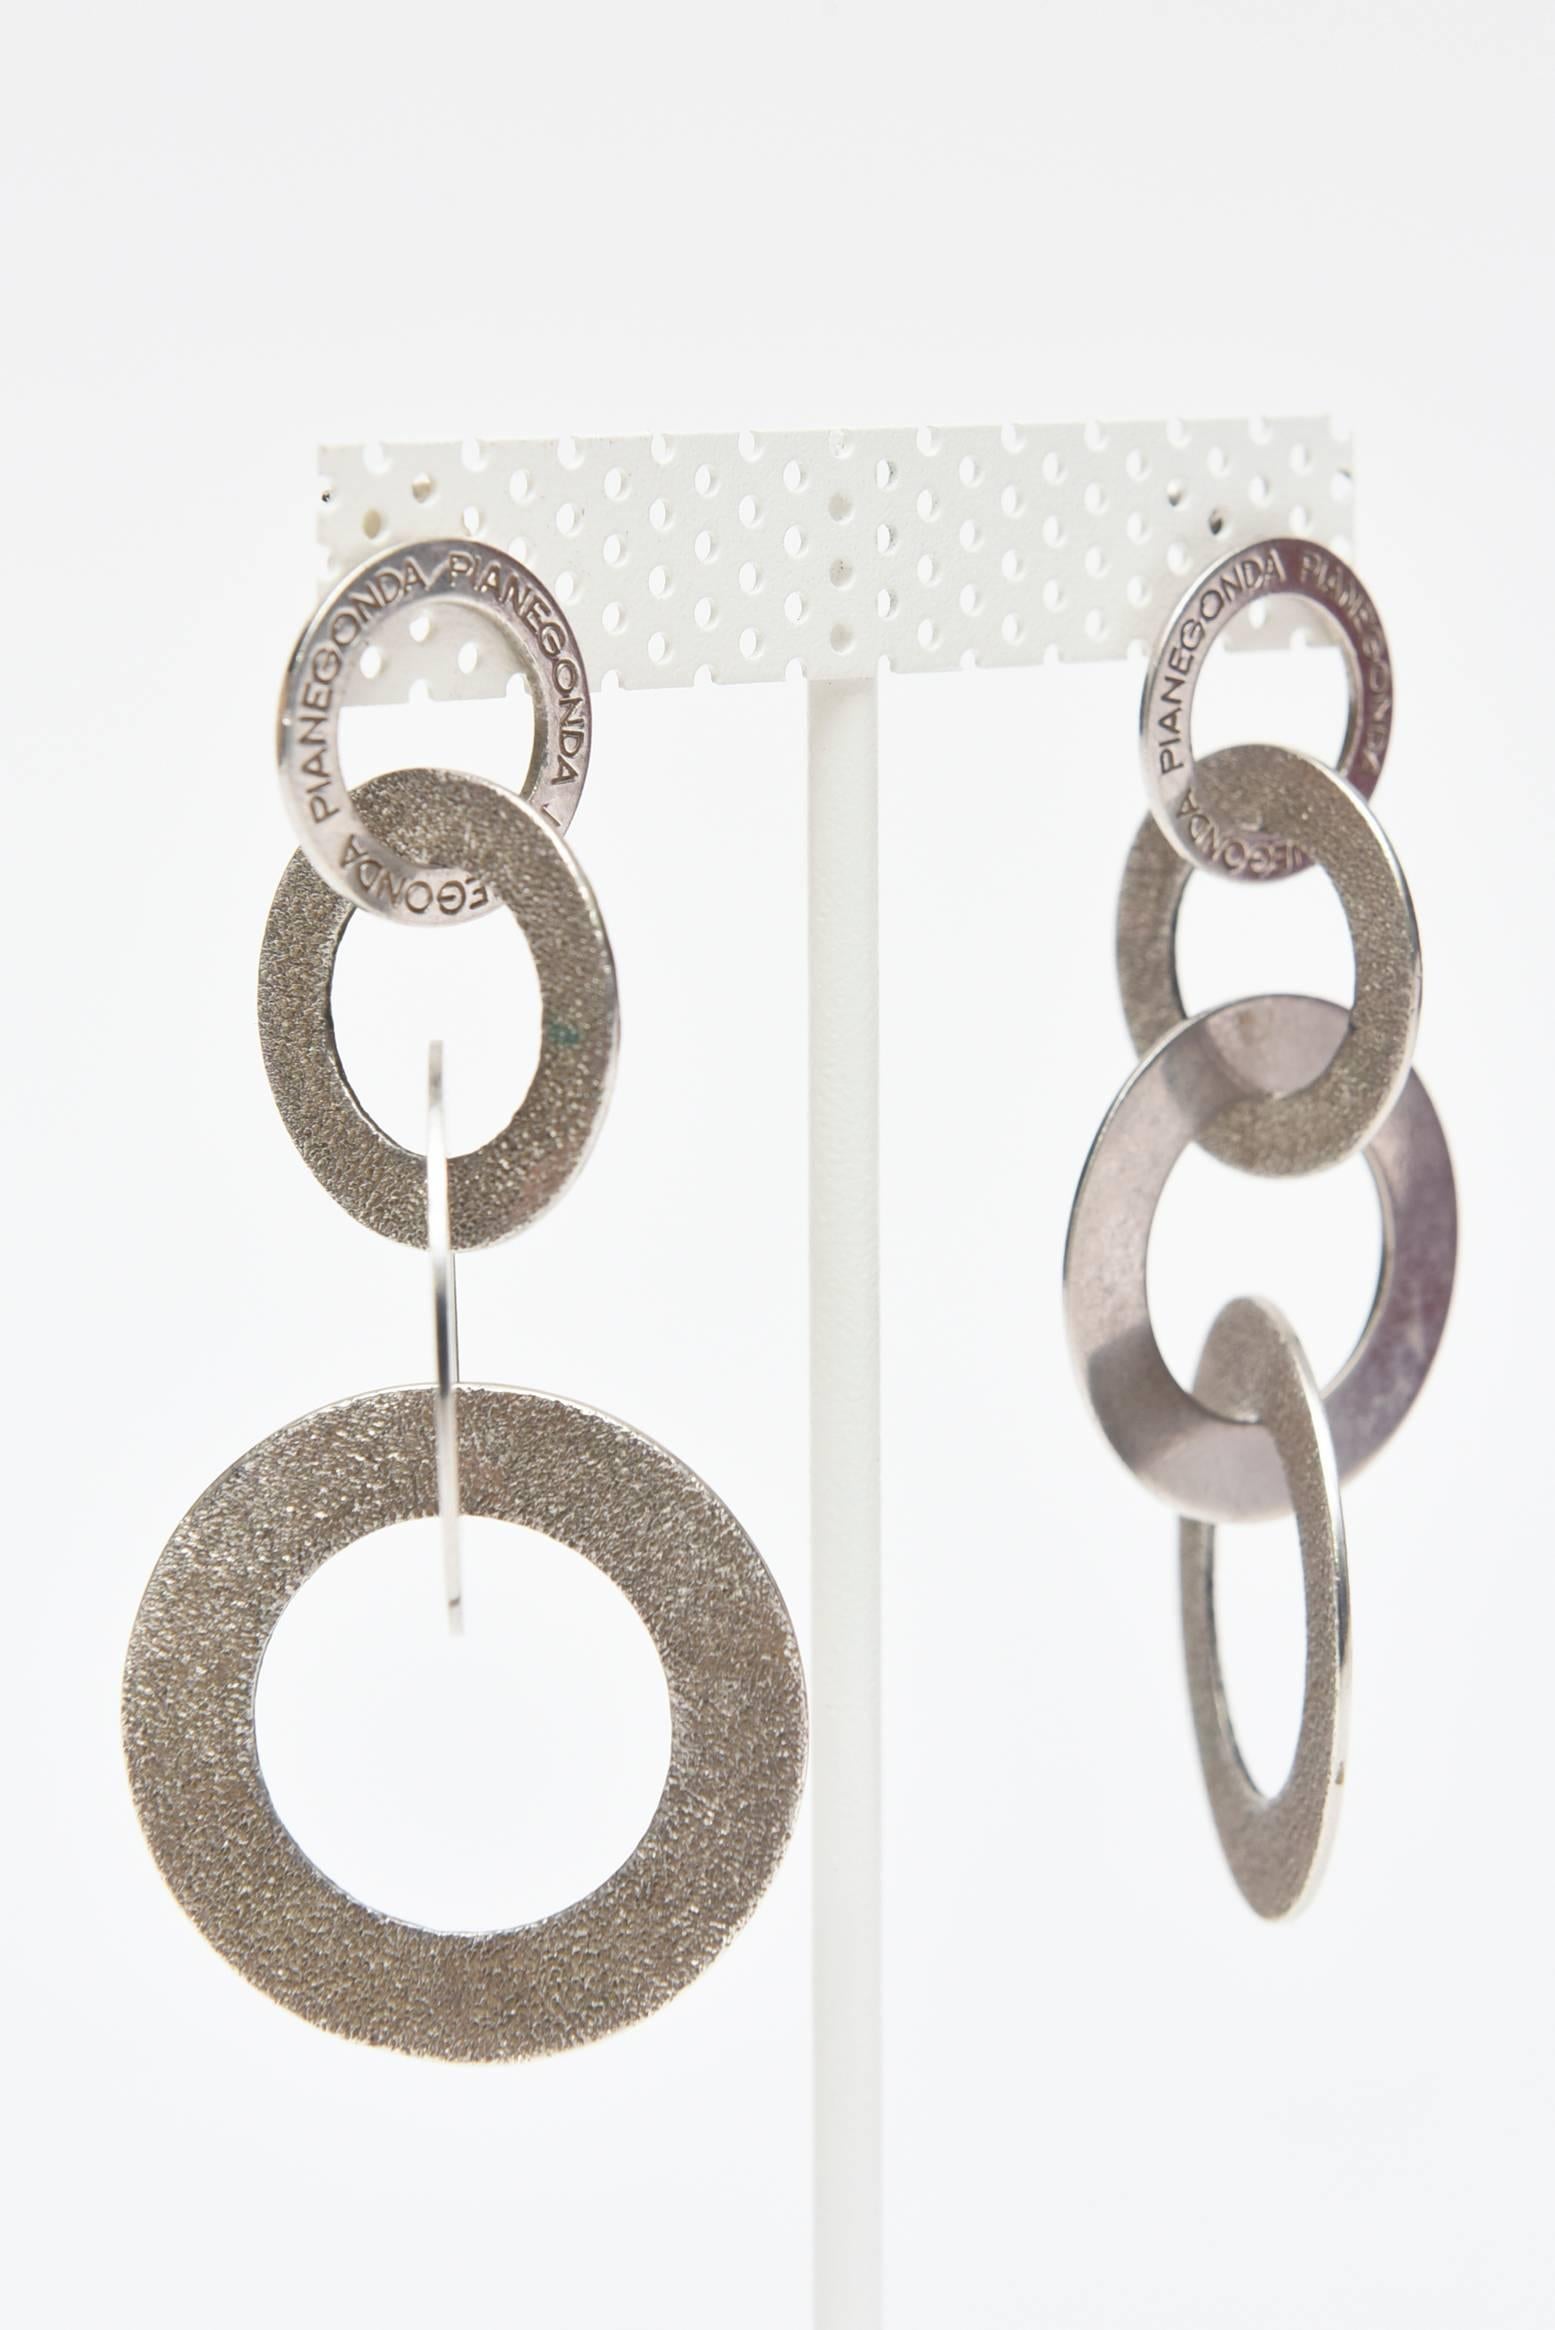 These sculptural Italian and marked four disc, two toned, sterling silver bangle earrings have texture versus polish.  The textural part is blackened Sterling Silver, and the other rings are a flat polish. They are much more interesting in person.